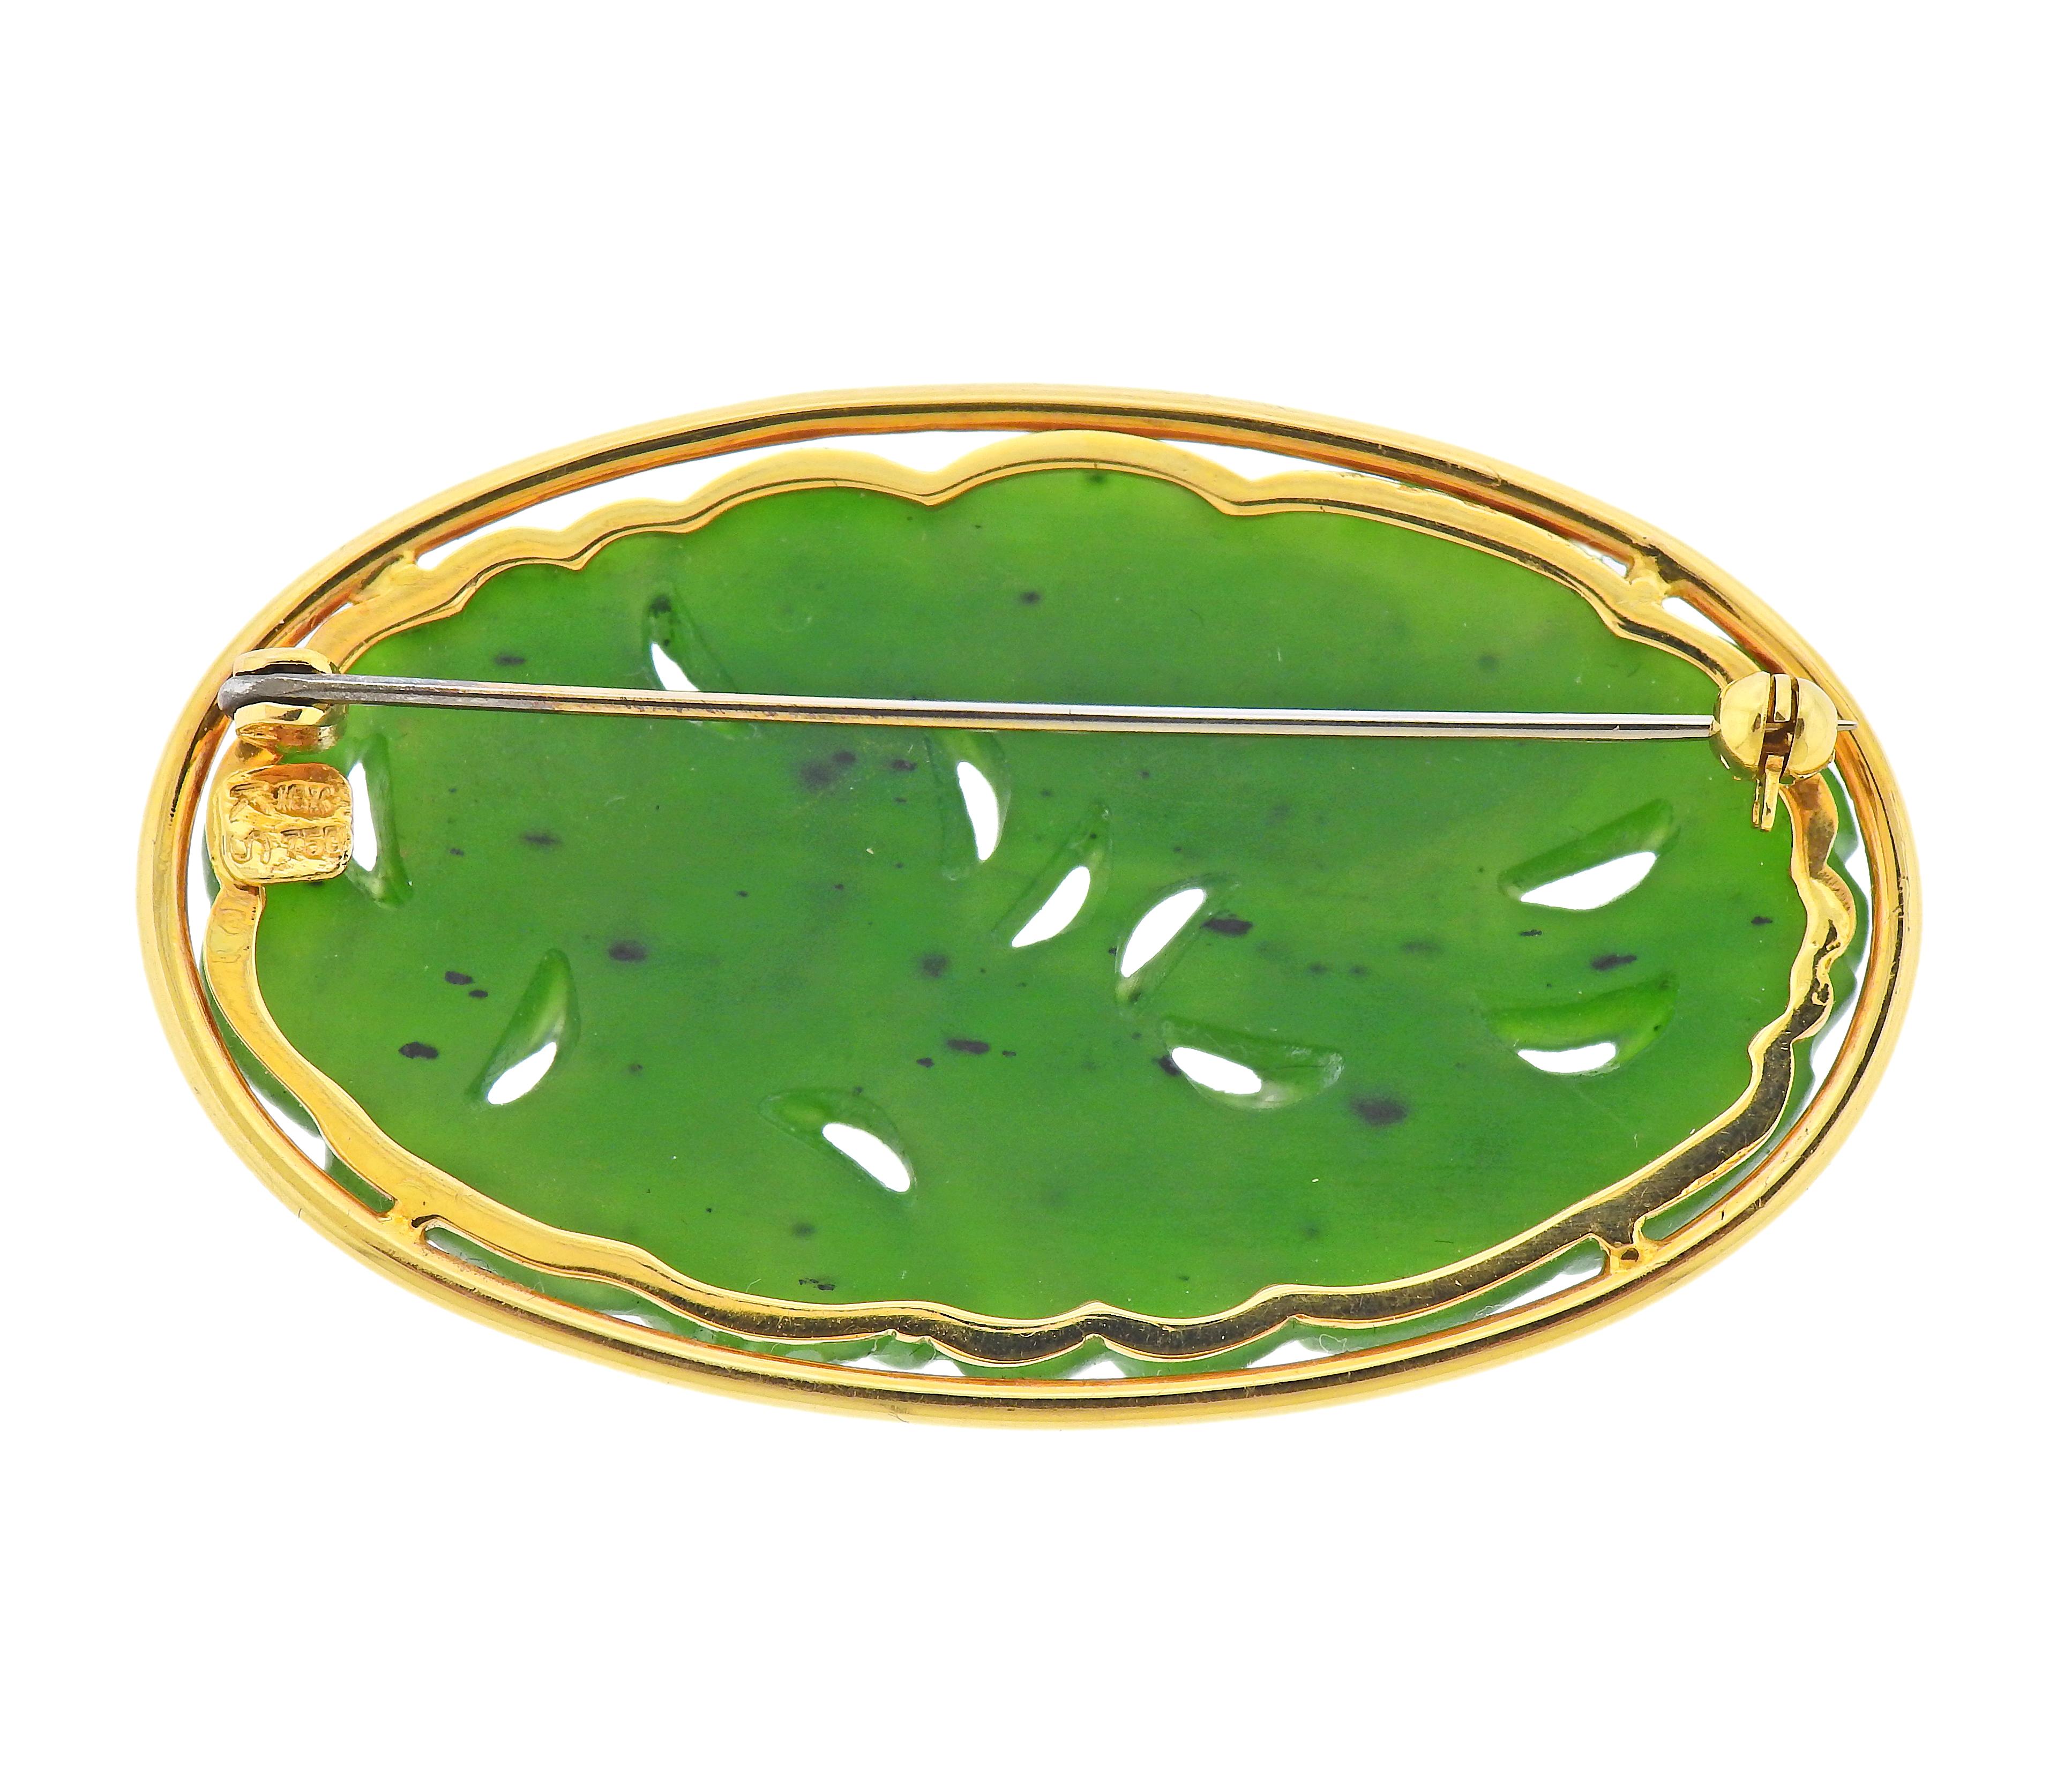 Oval 18k gold brooch with carved nephrite jade. Brooch is 53mm x 31mm. Marked 18k. Weight - 16.7 grams.